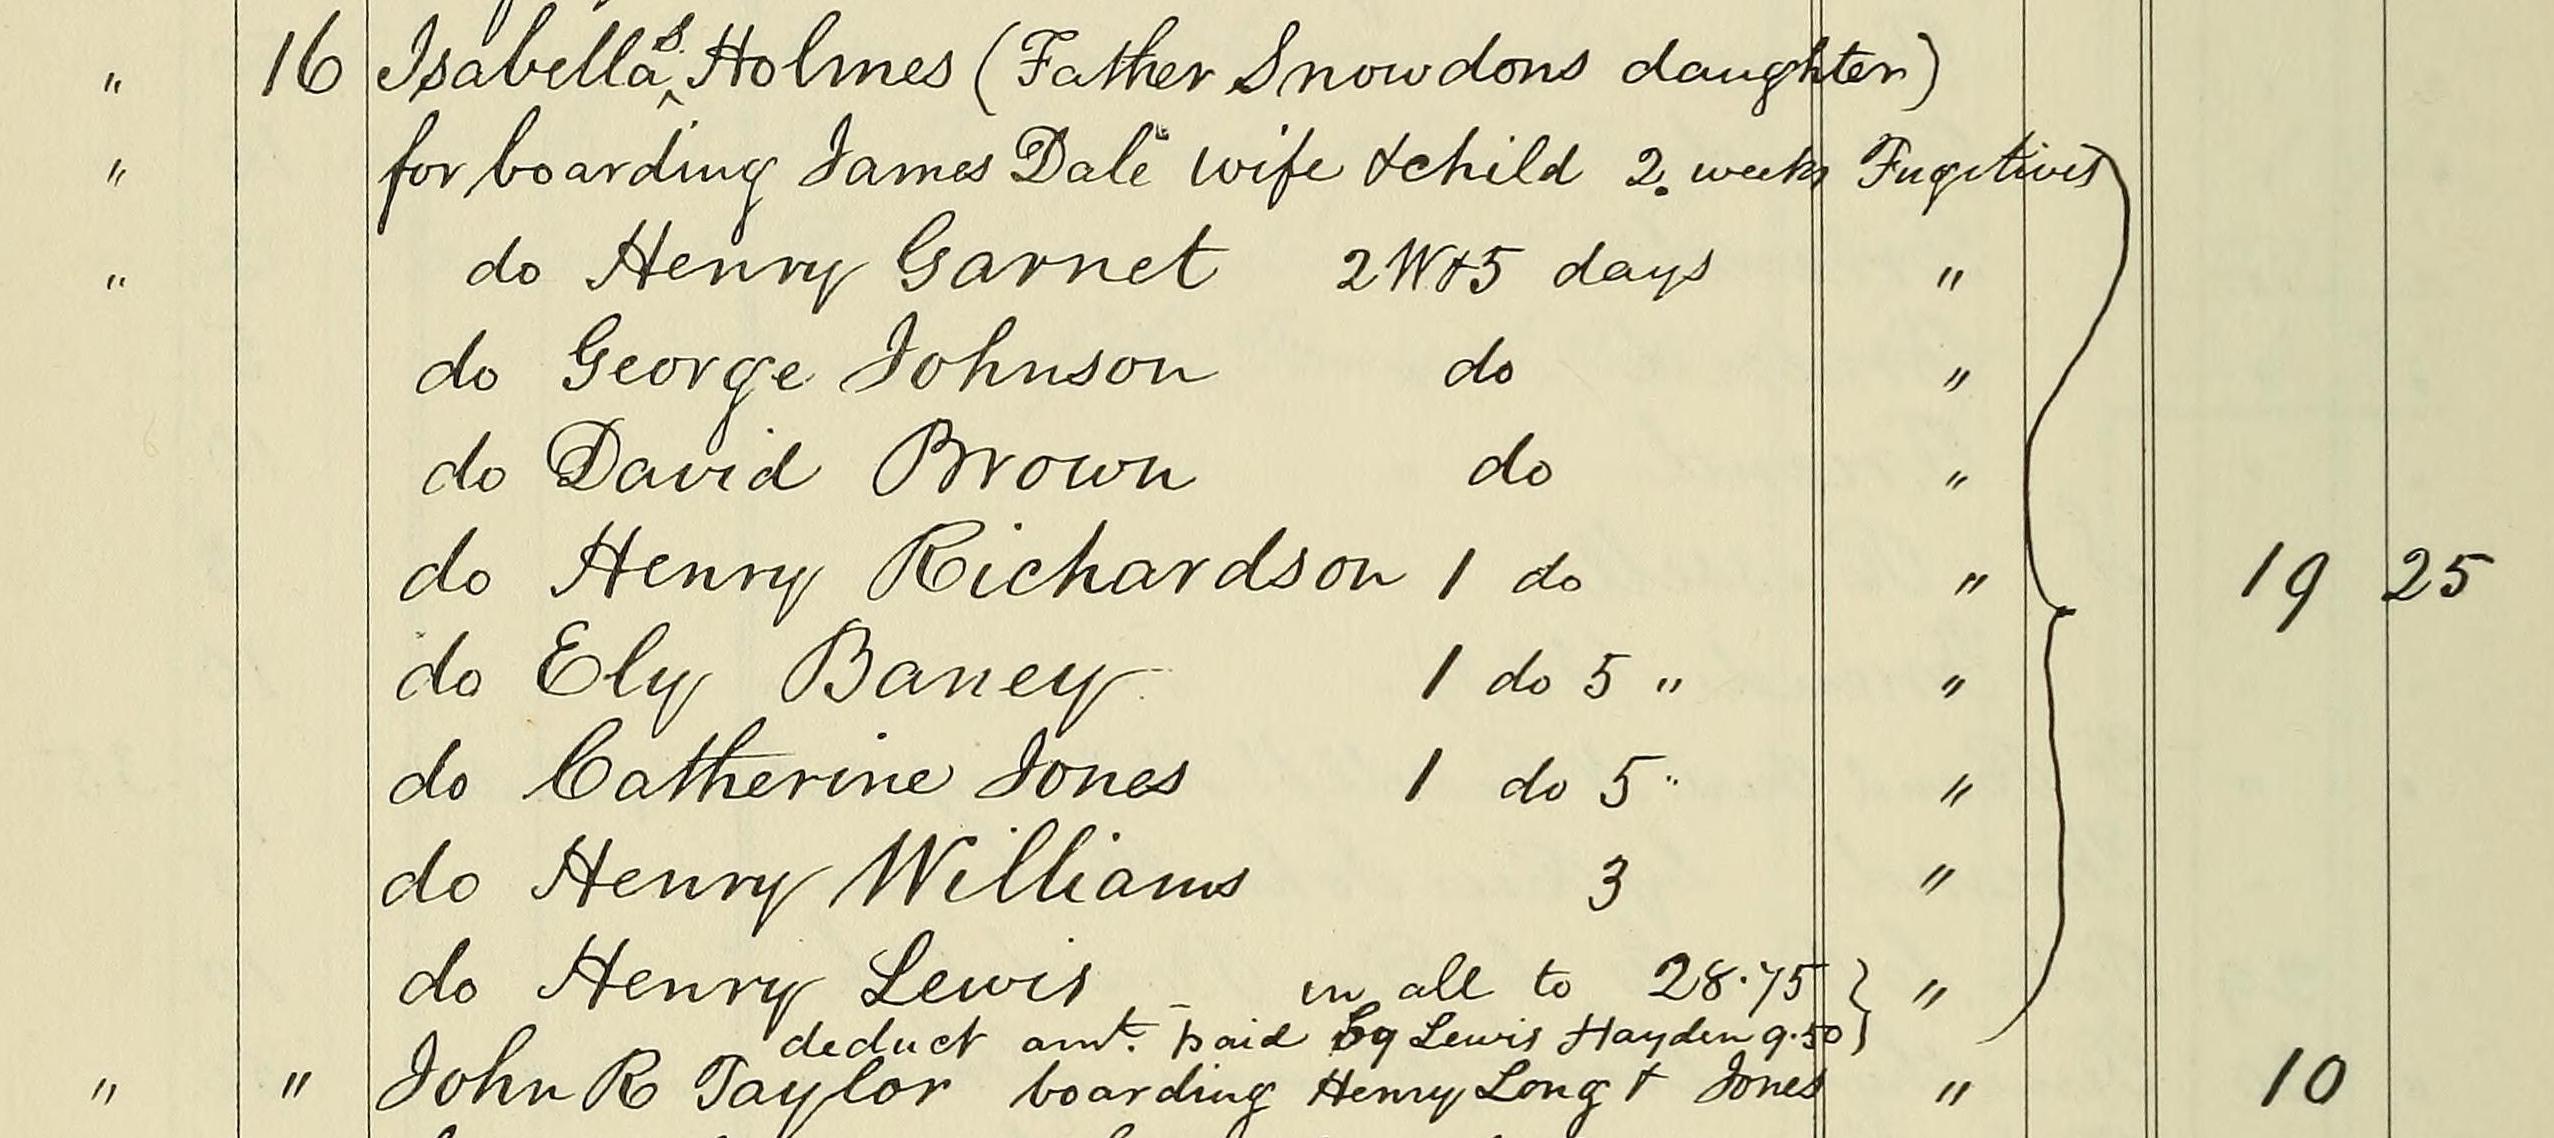 Selection of Vigilance Committee Records that lists several names under Isabella Holmes.